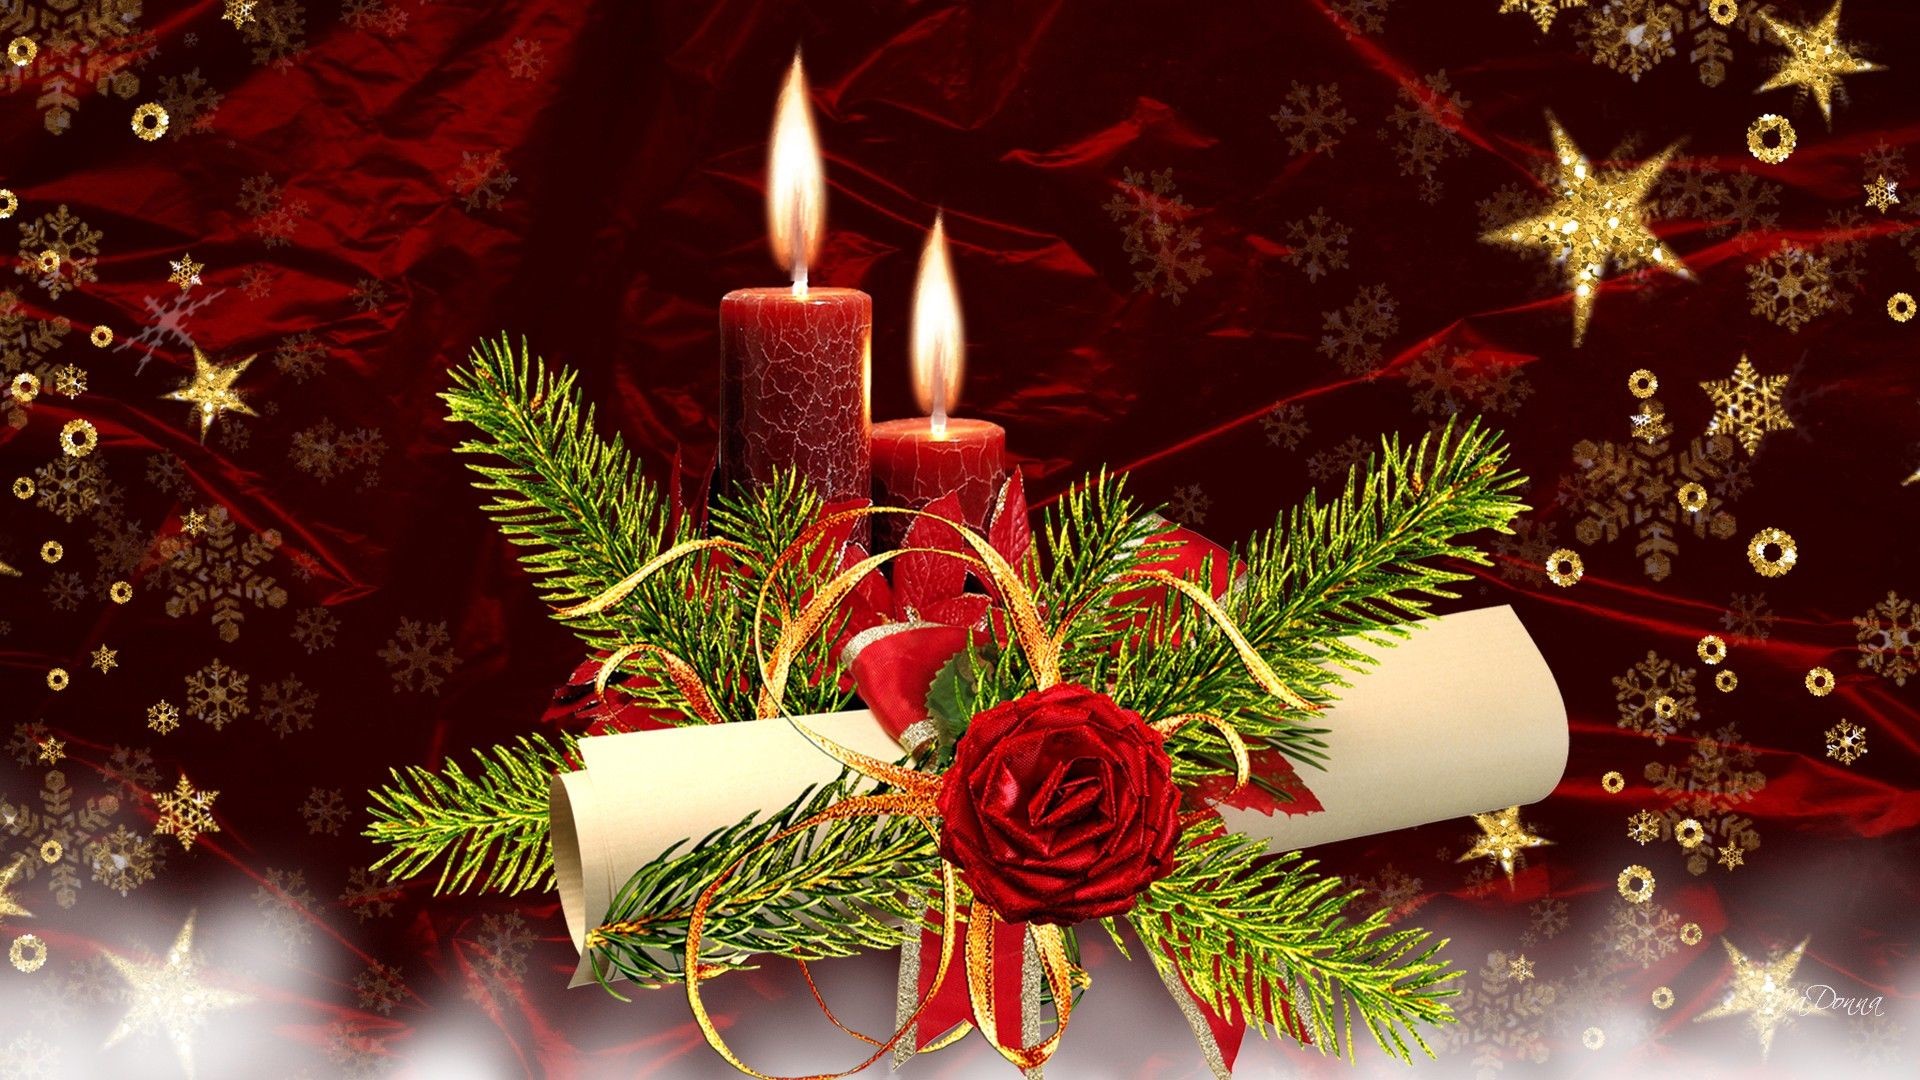 1920x1080 Lighting candles in memory of those loved Christmas Cle Bright wallpaper  free